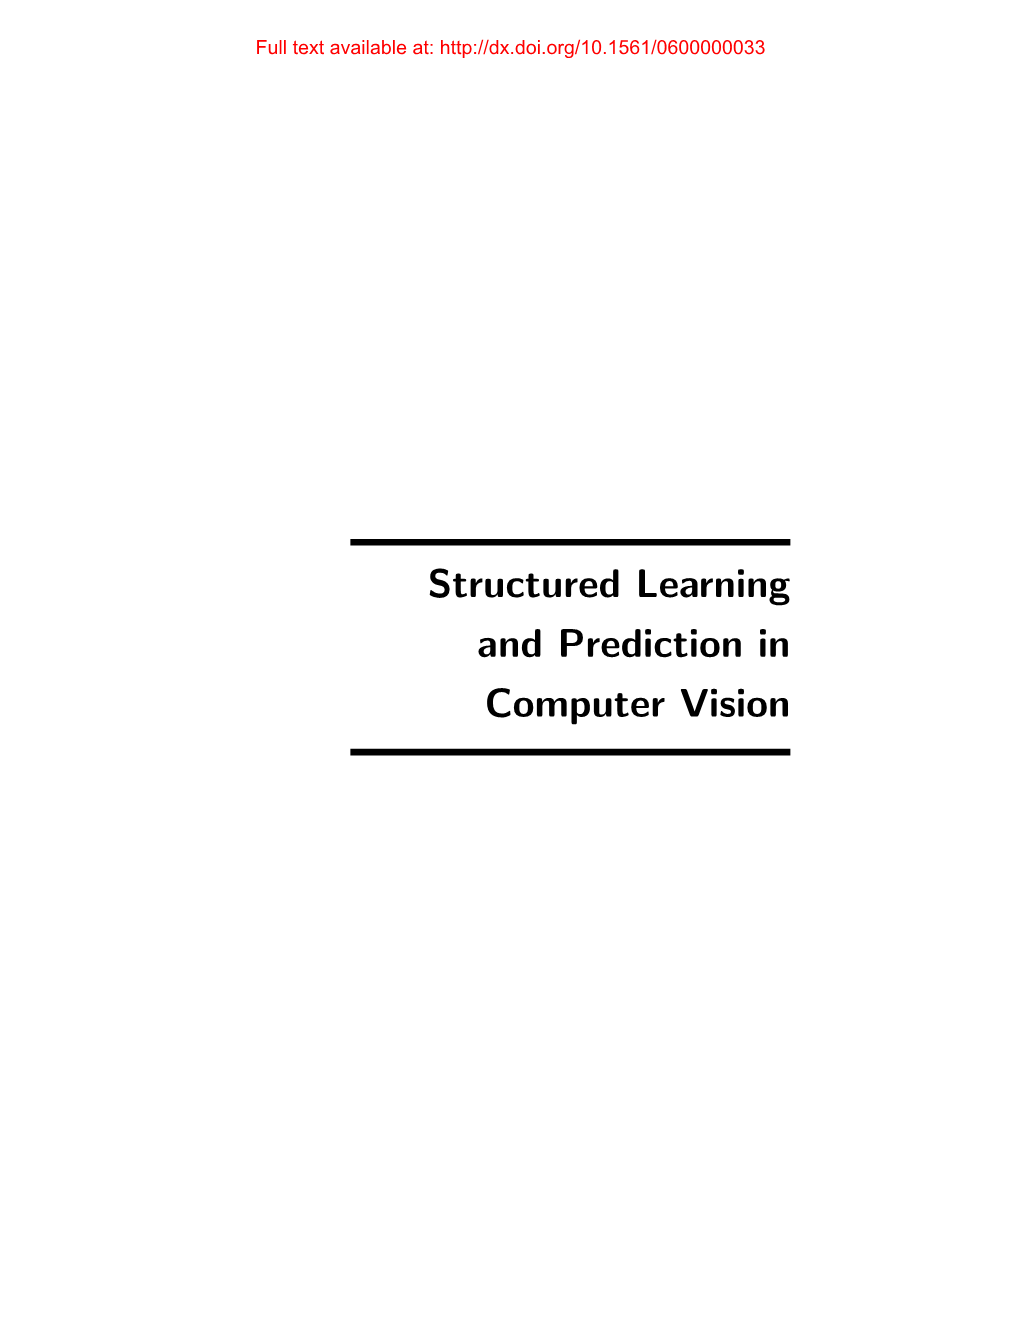 Structured Learning and Prediction in Computer Vision Full Text Available At